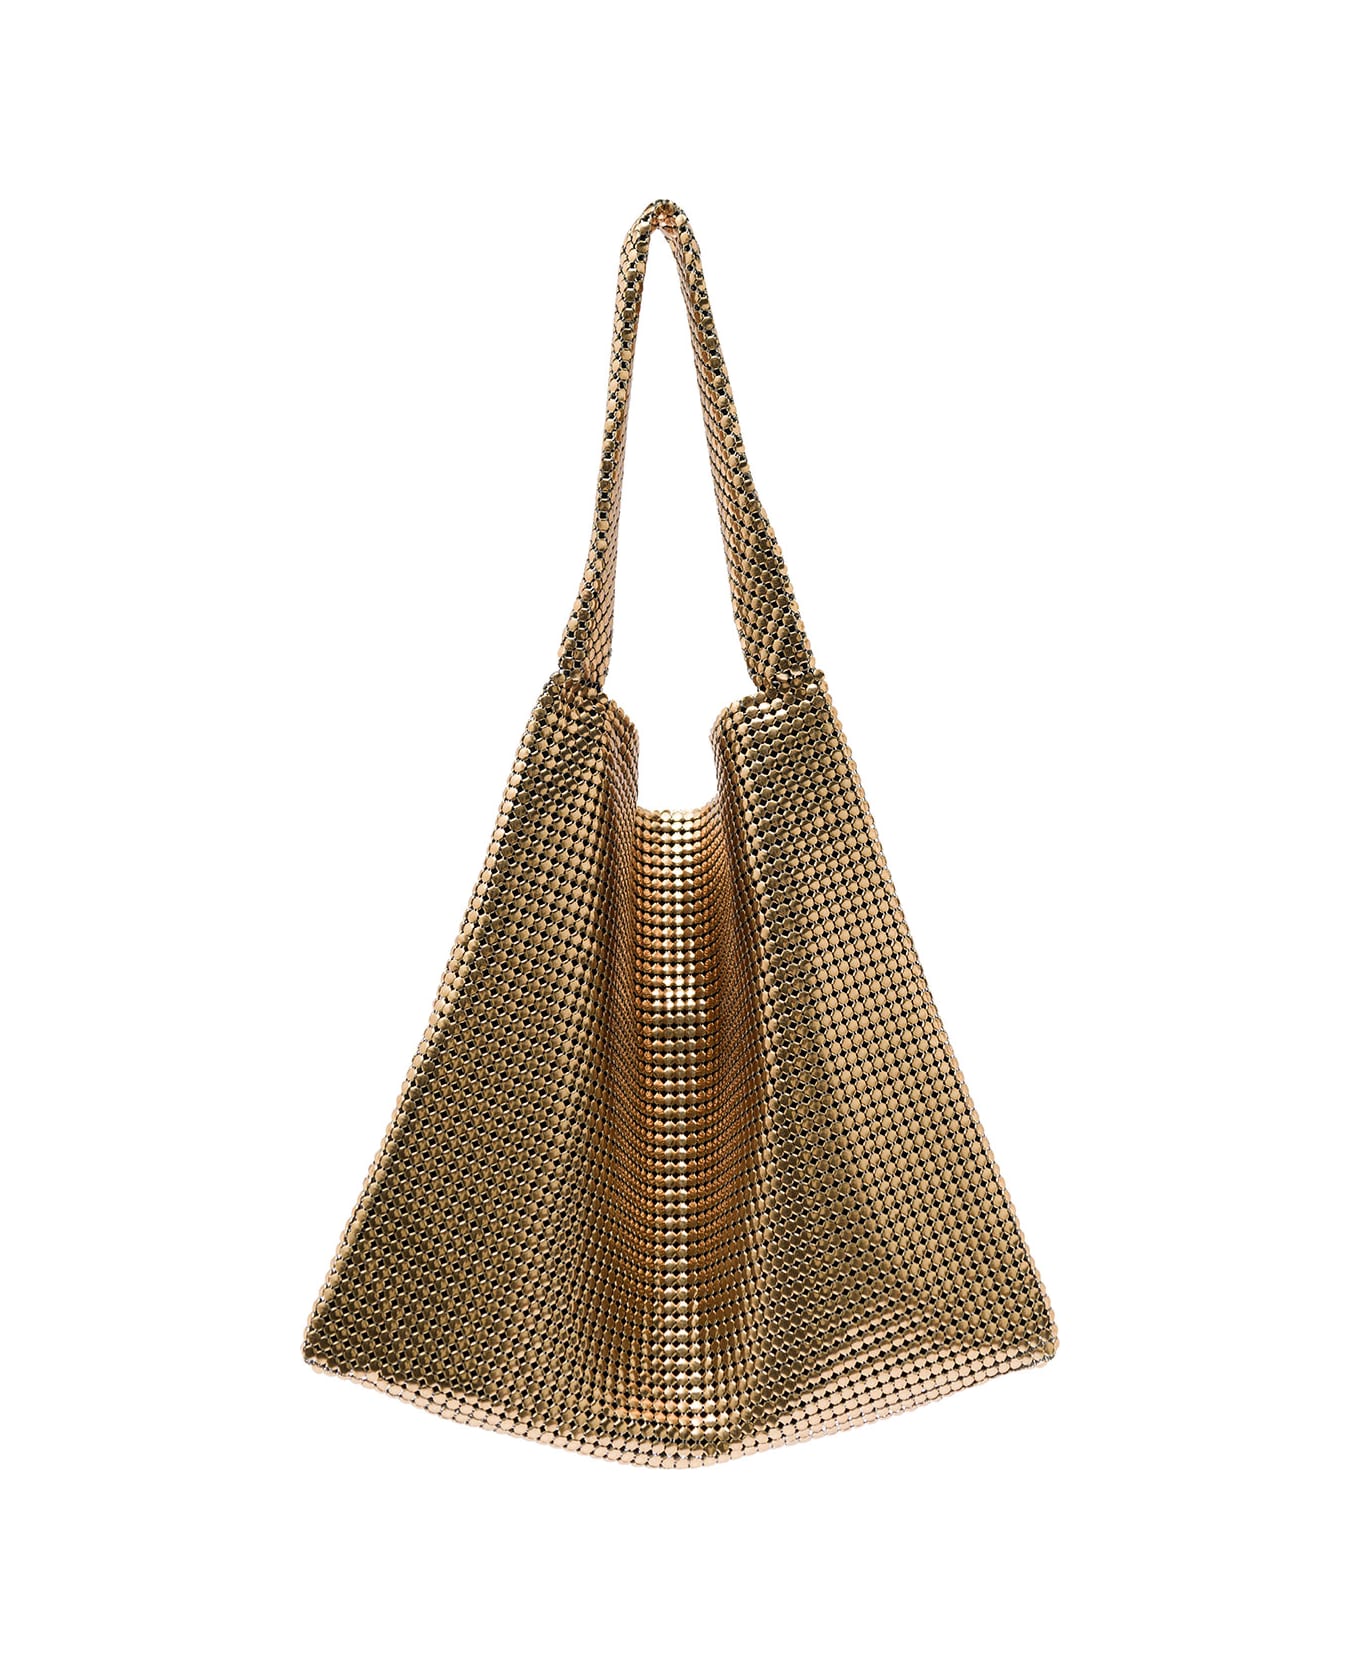 Paco Rabanne Pixel Tote - gold トートバッグ